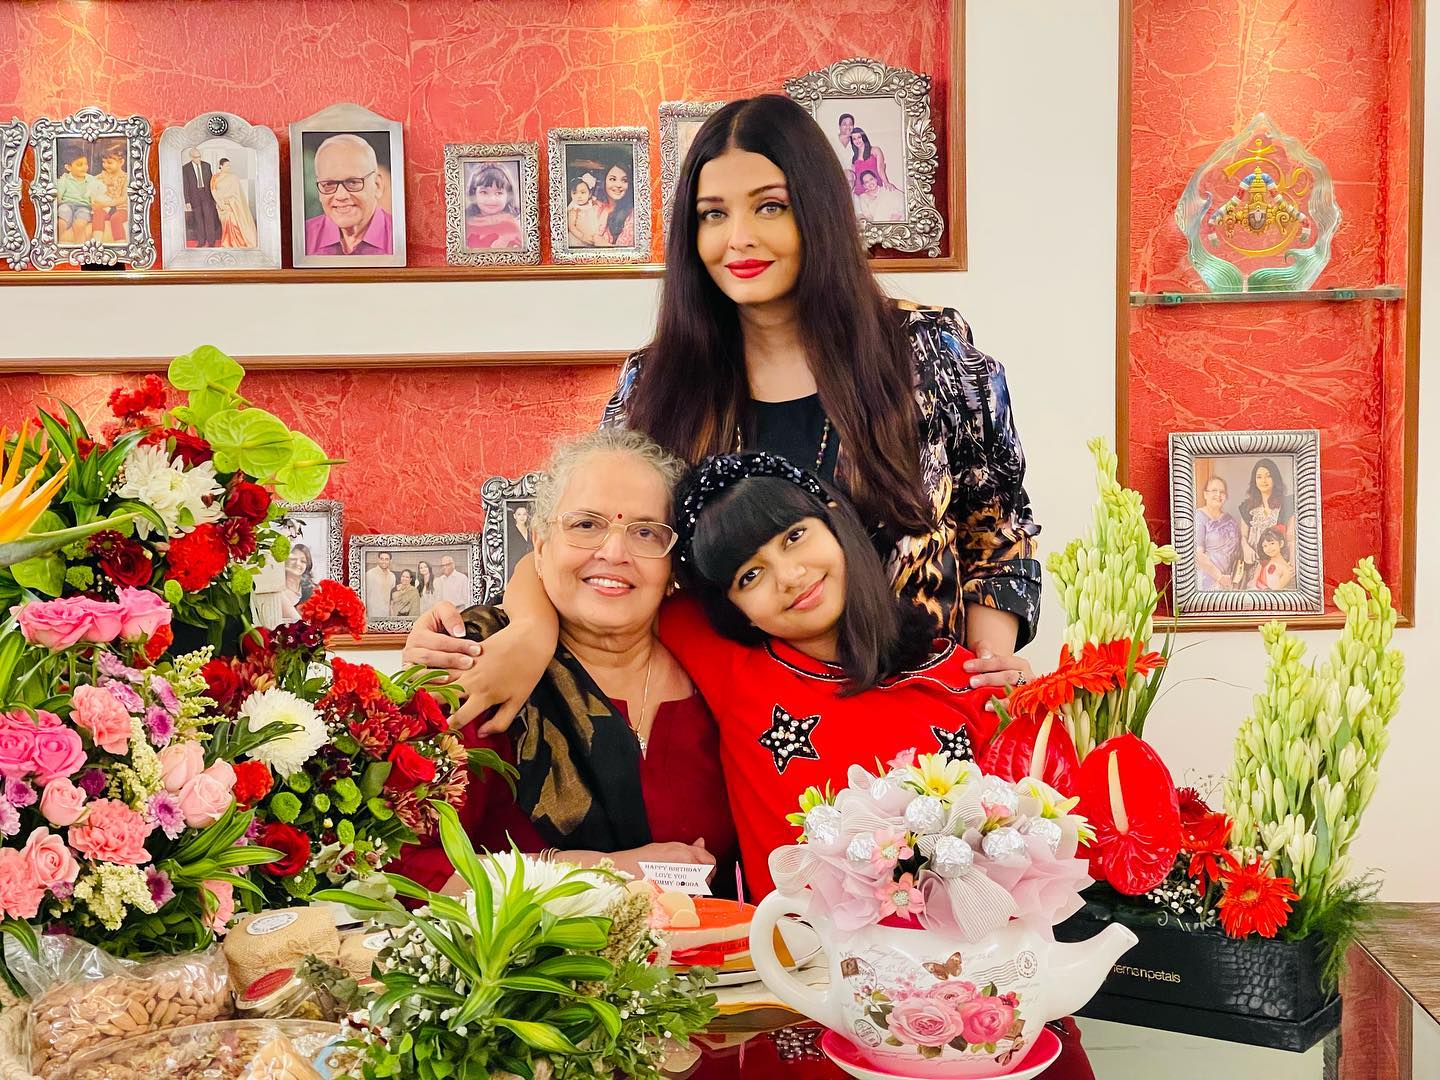 283679962 1651055185248616 7457113423445486950 n Aishwarya Rai celebrated her mother Vrinda's birthday in a very special way, showed a special glimpse of three generations in a single frame